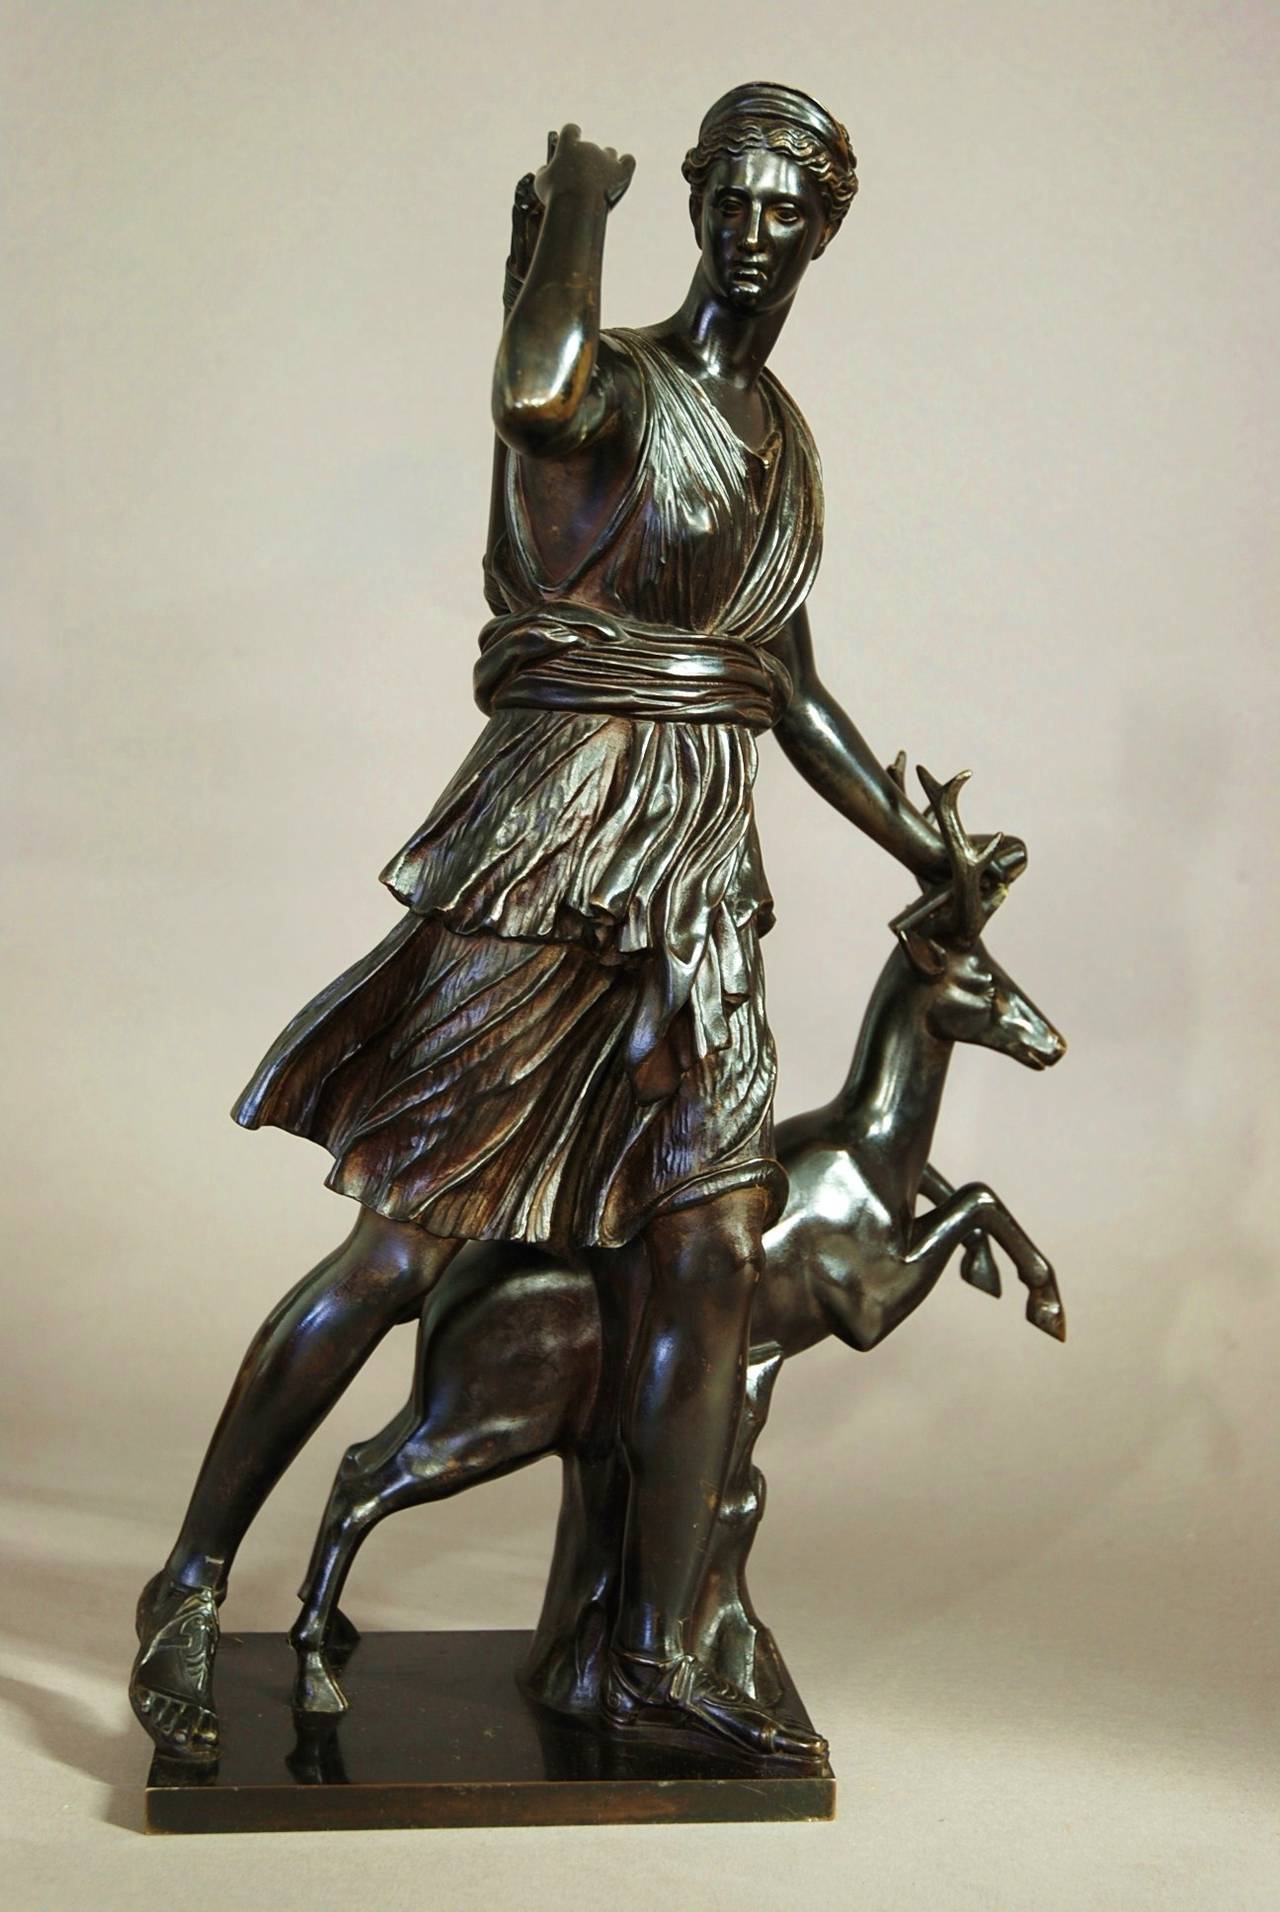 A mid 19th century bronze figure 'Diana of Versailles' or 'Diana the Huntress' after the antique, taken from the original large marble sculpture in The Louvre, Paris.

In this bronze, Diana is portrayed as the huntress with a vibrant, young male